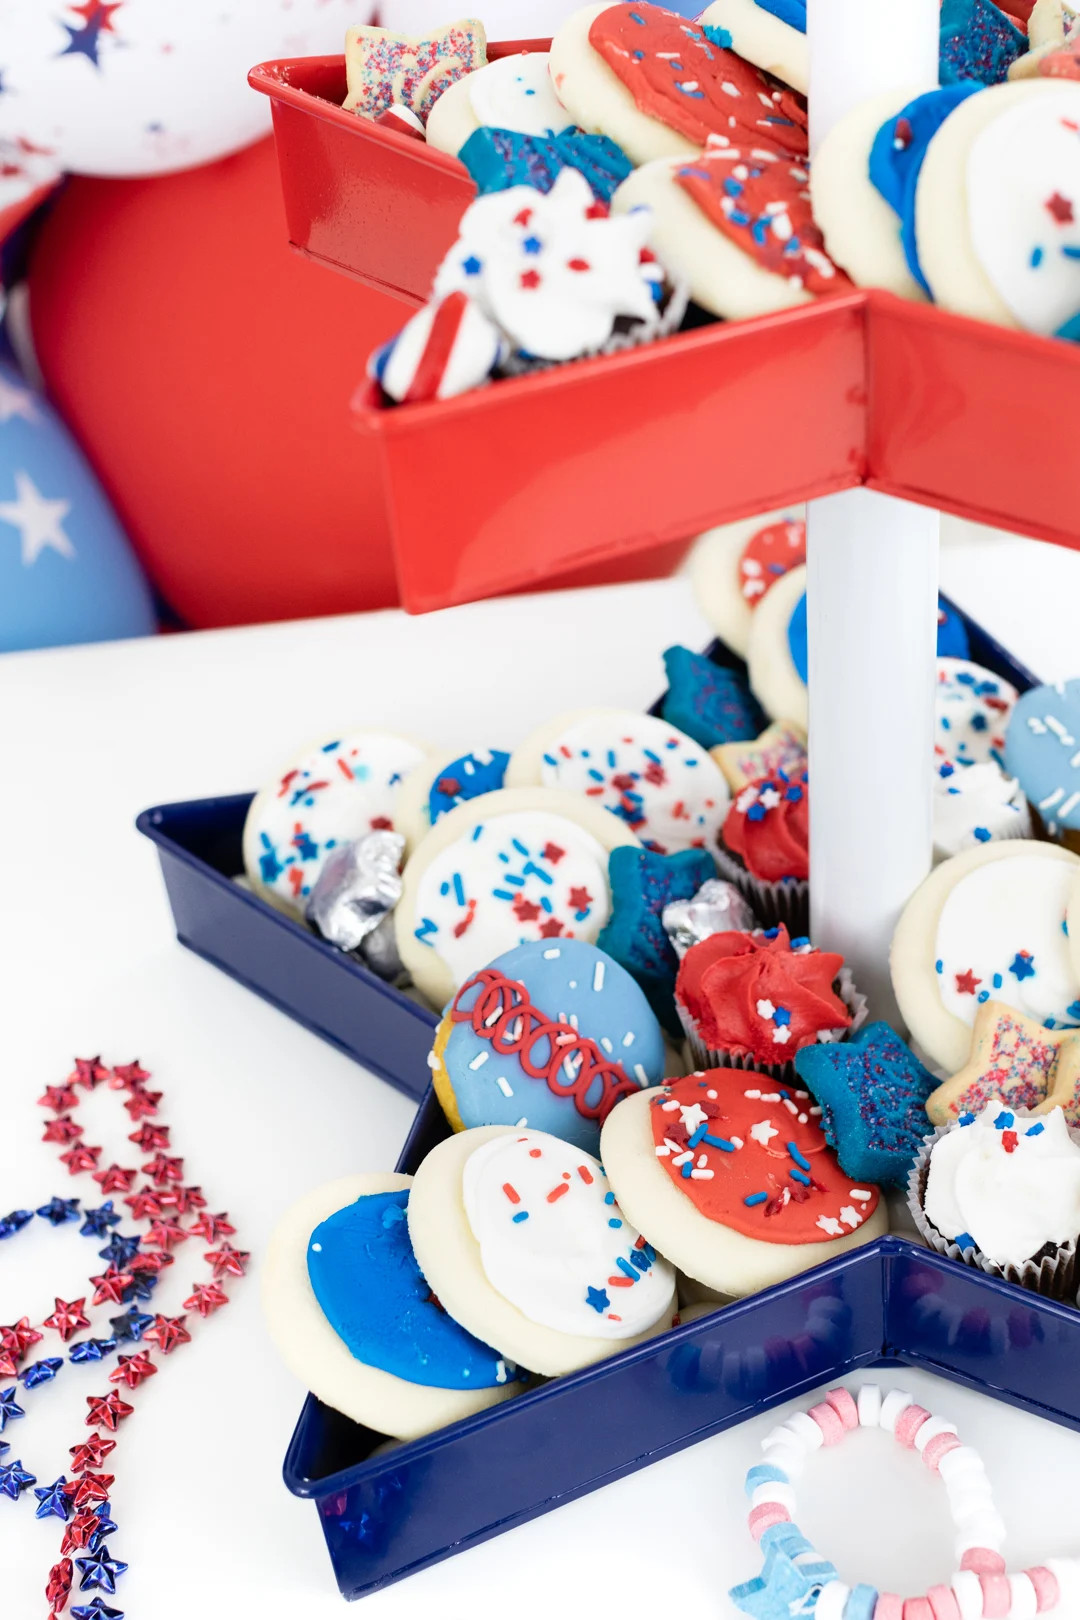 up close of red white and blue desserts. Cookies, cupcakes and candy.